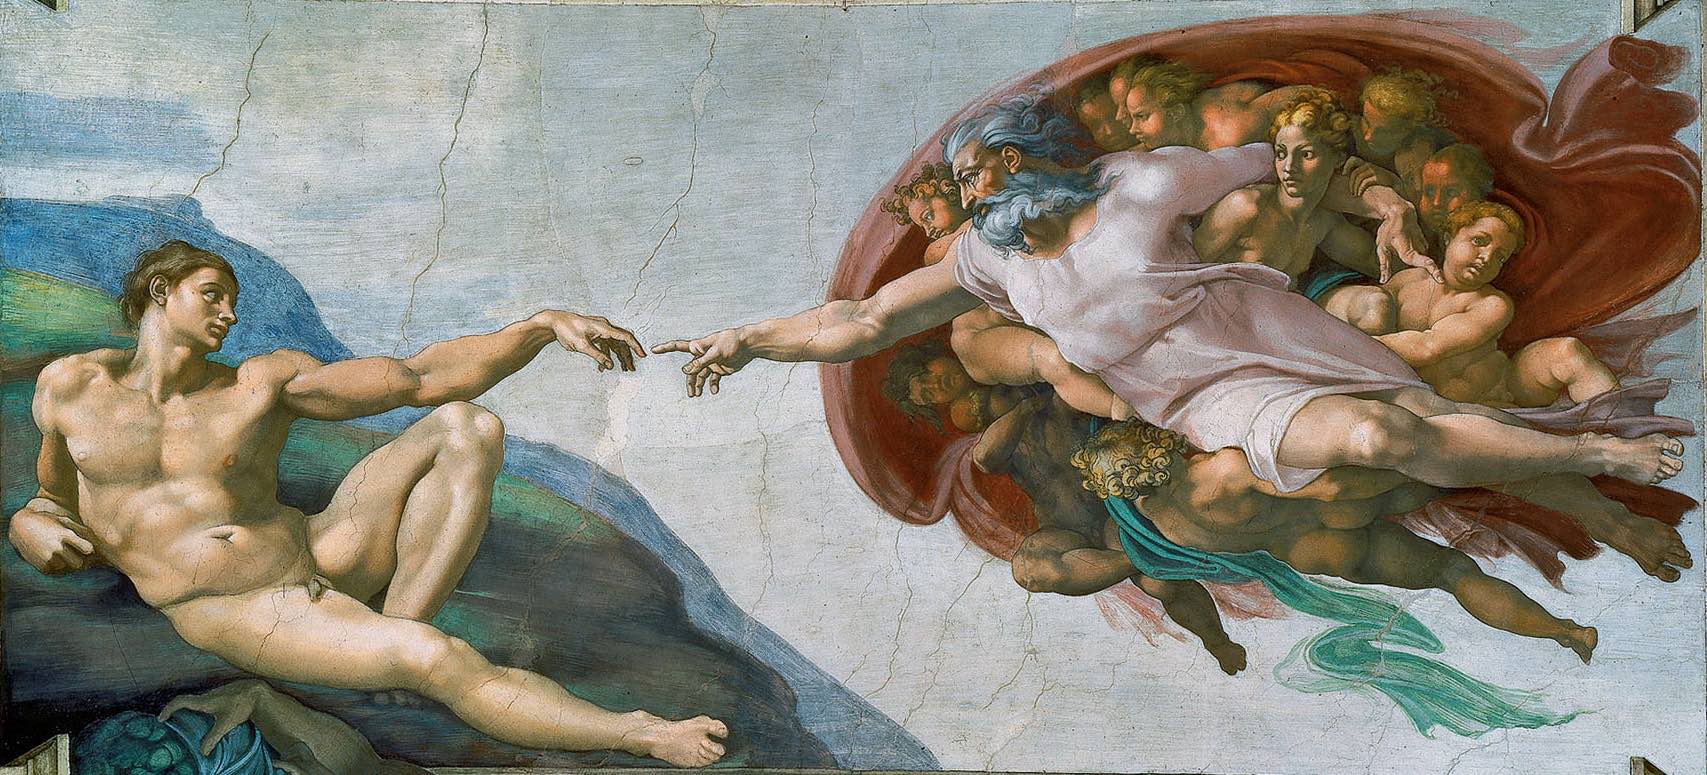 Photo of https://visionarysociety.org/images/topic/images/Michelangelo.jpg